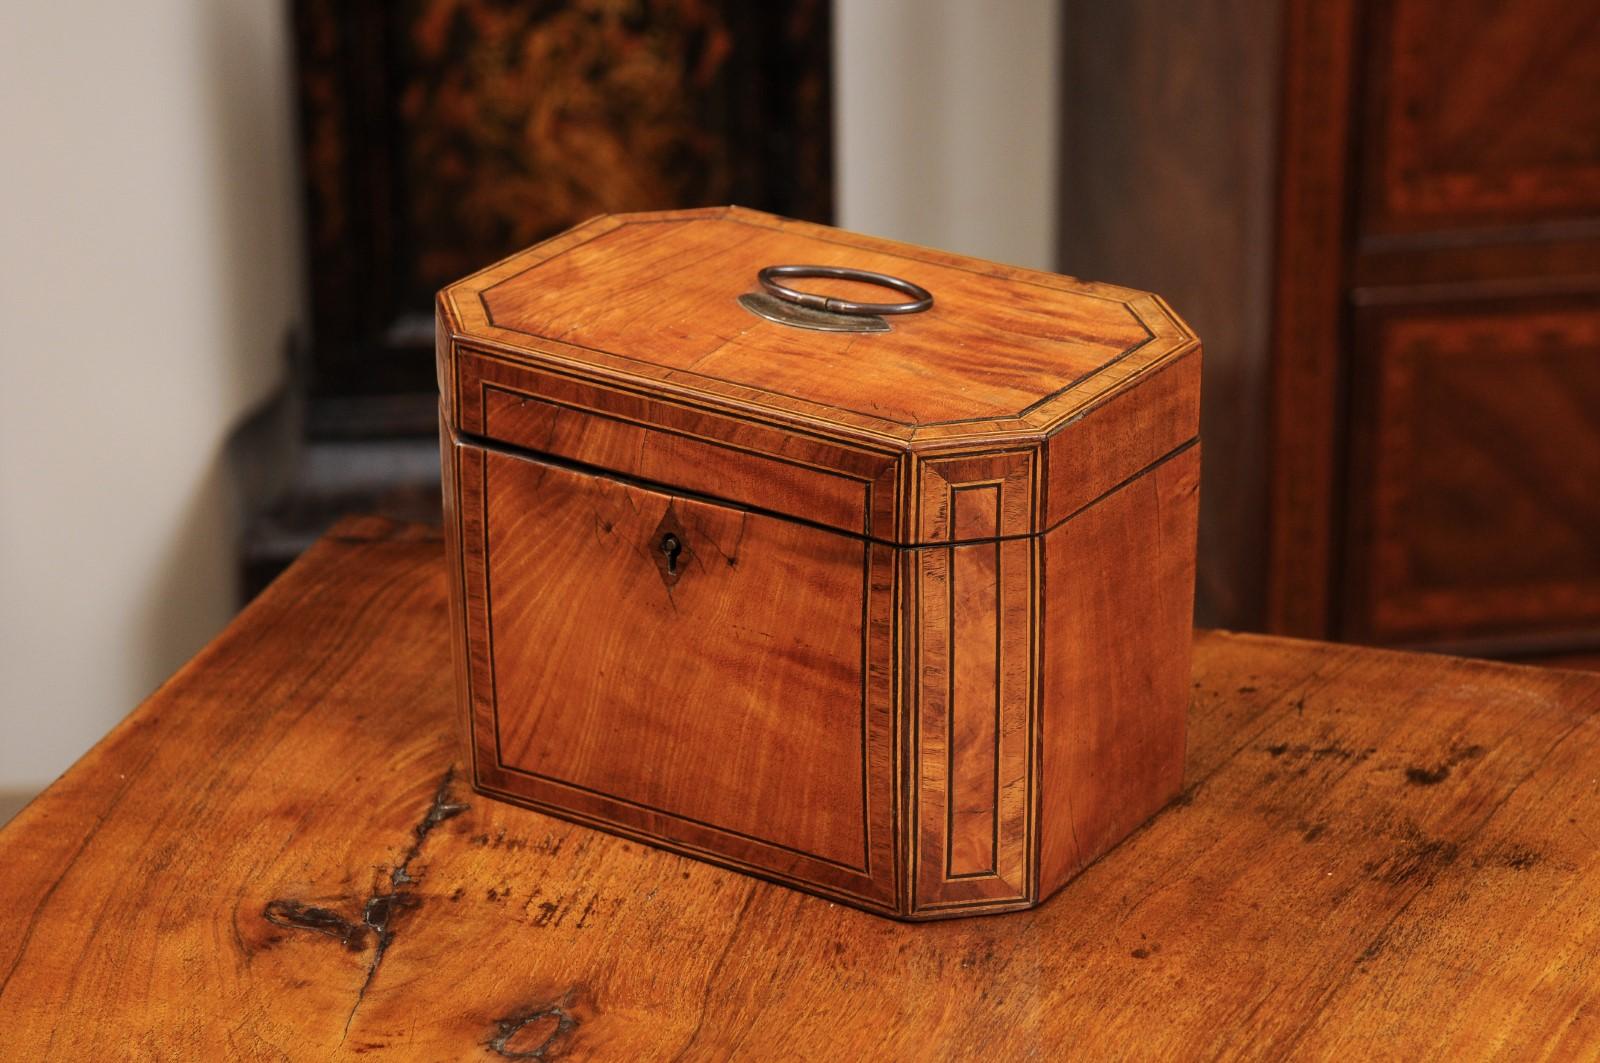  English Octagonal Satinwood Tea Caddy with Rosewood Cross Banding  For Sale 6